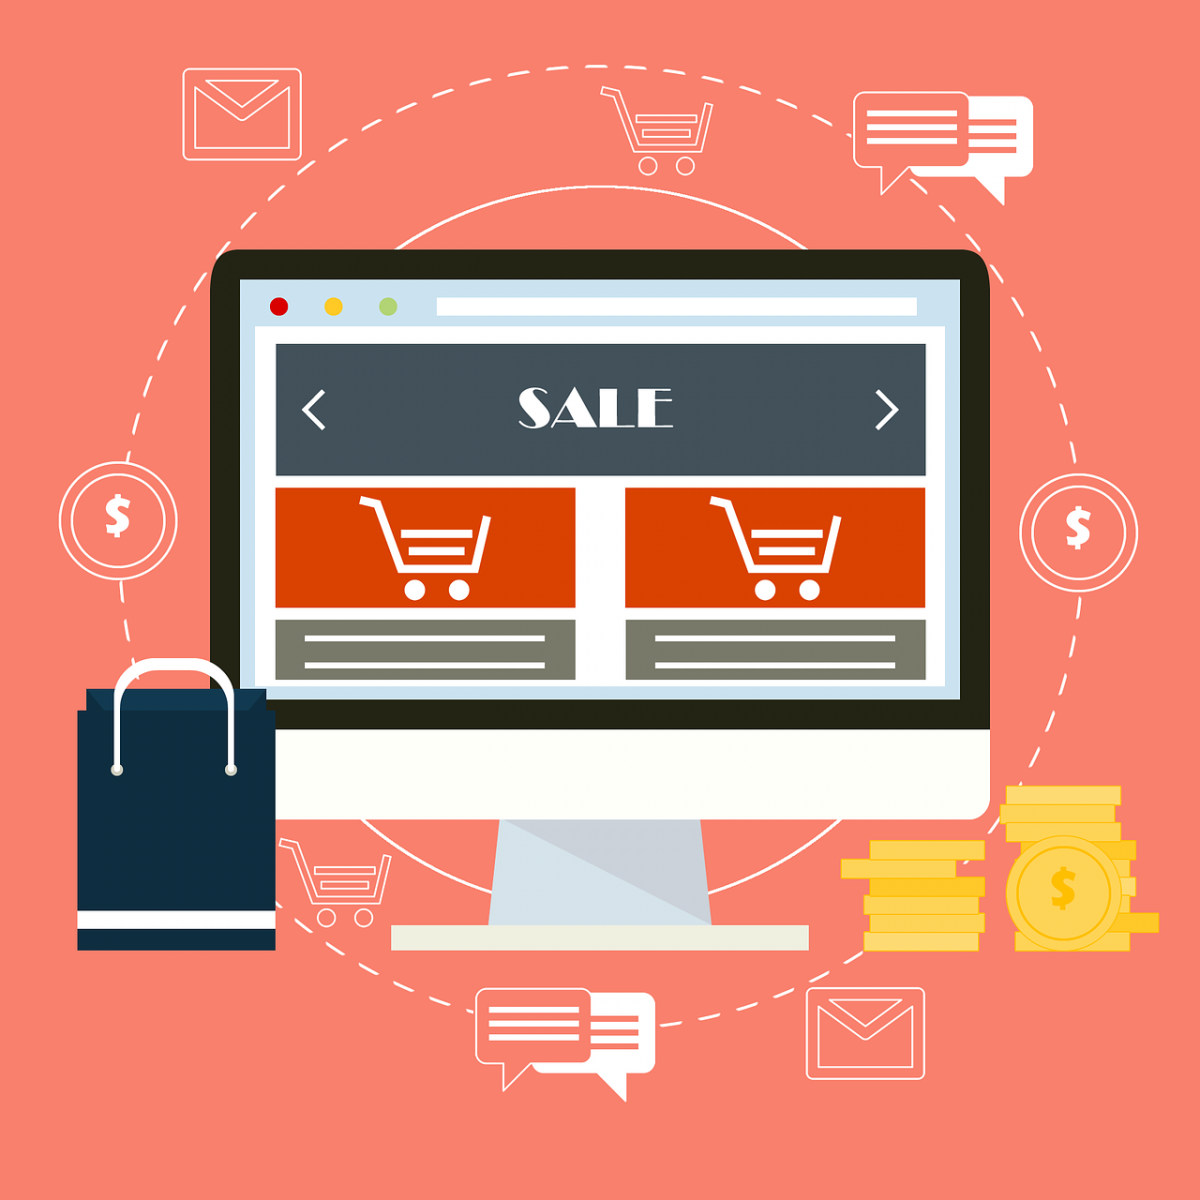 Tips for Starting a Successful E-Commerce Business